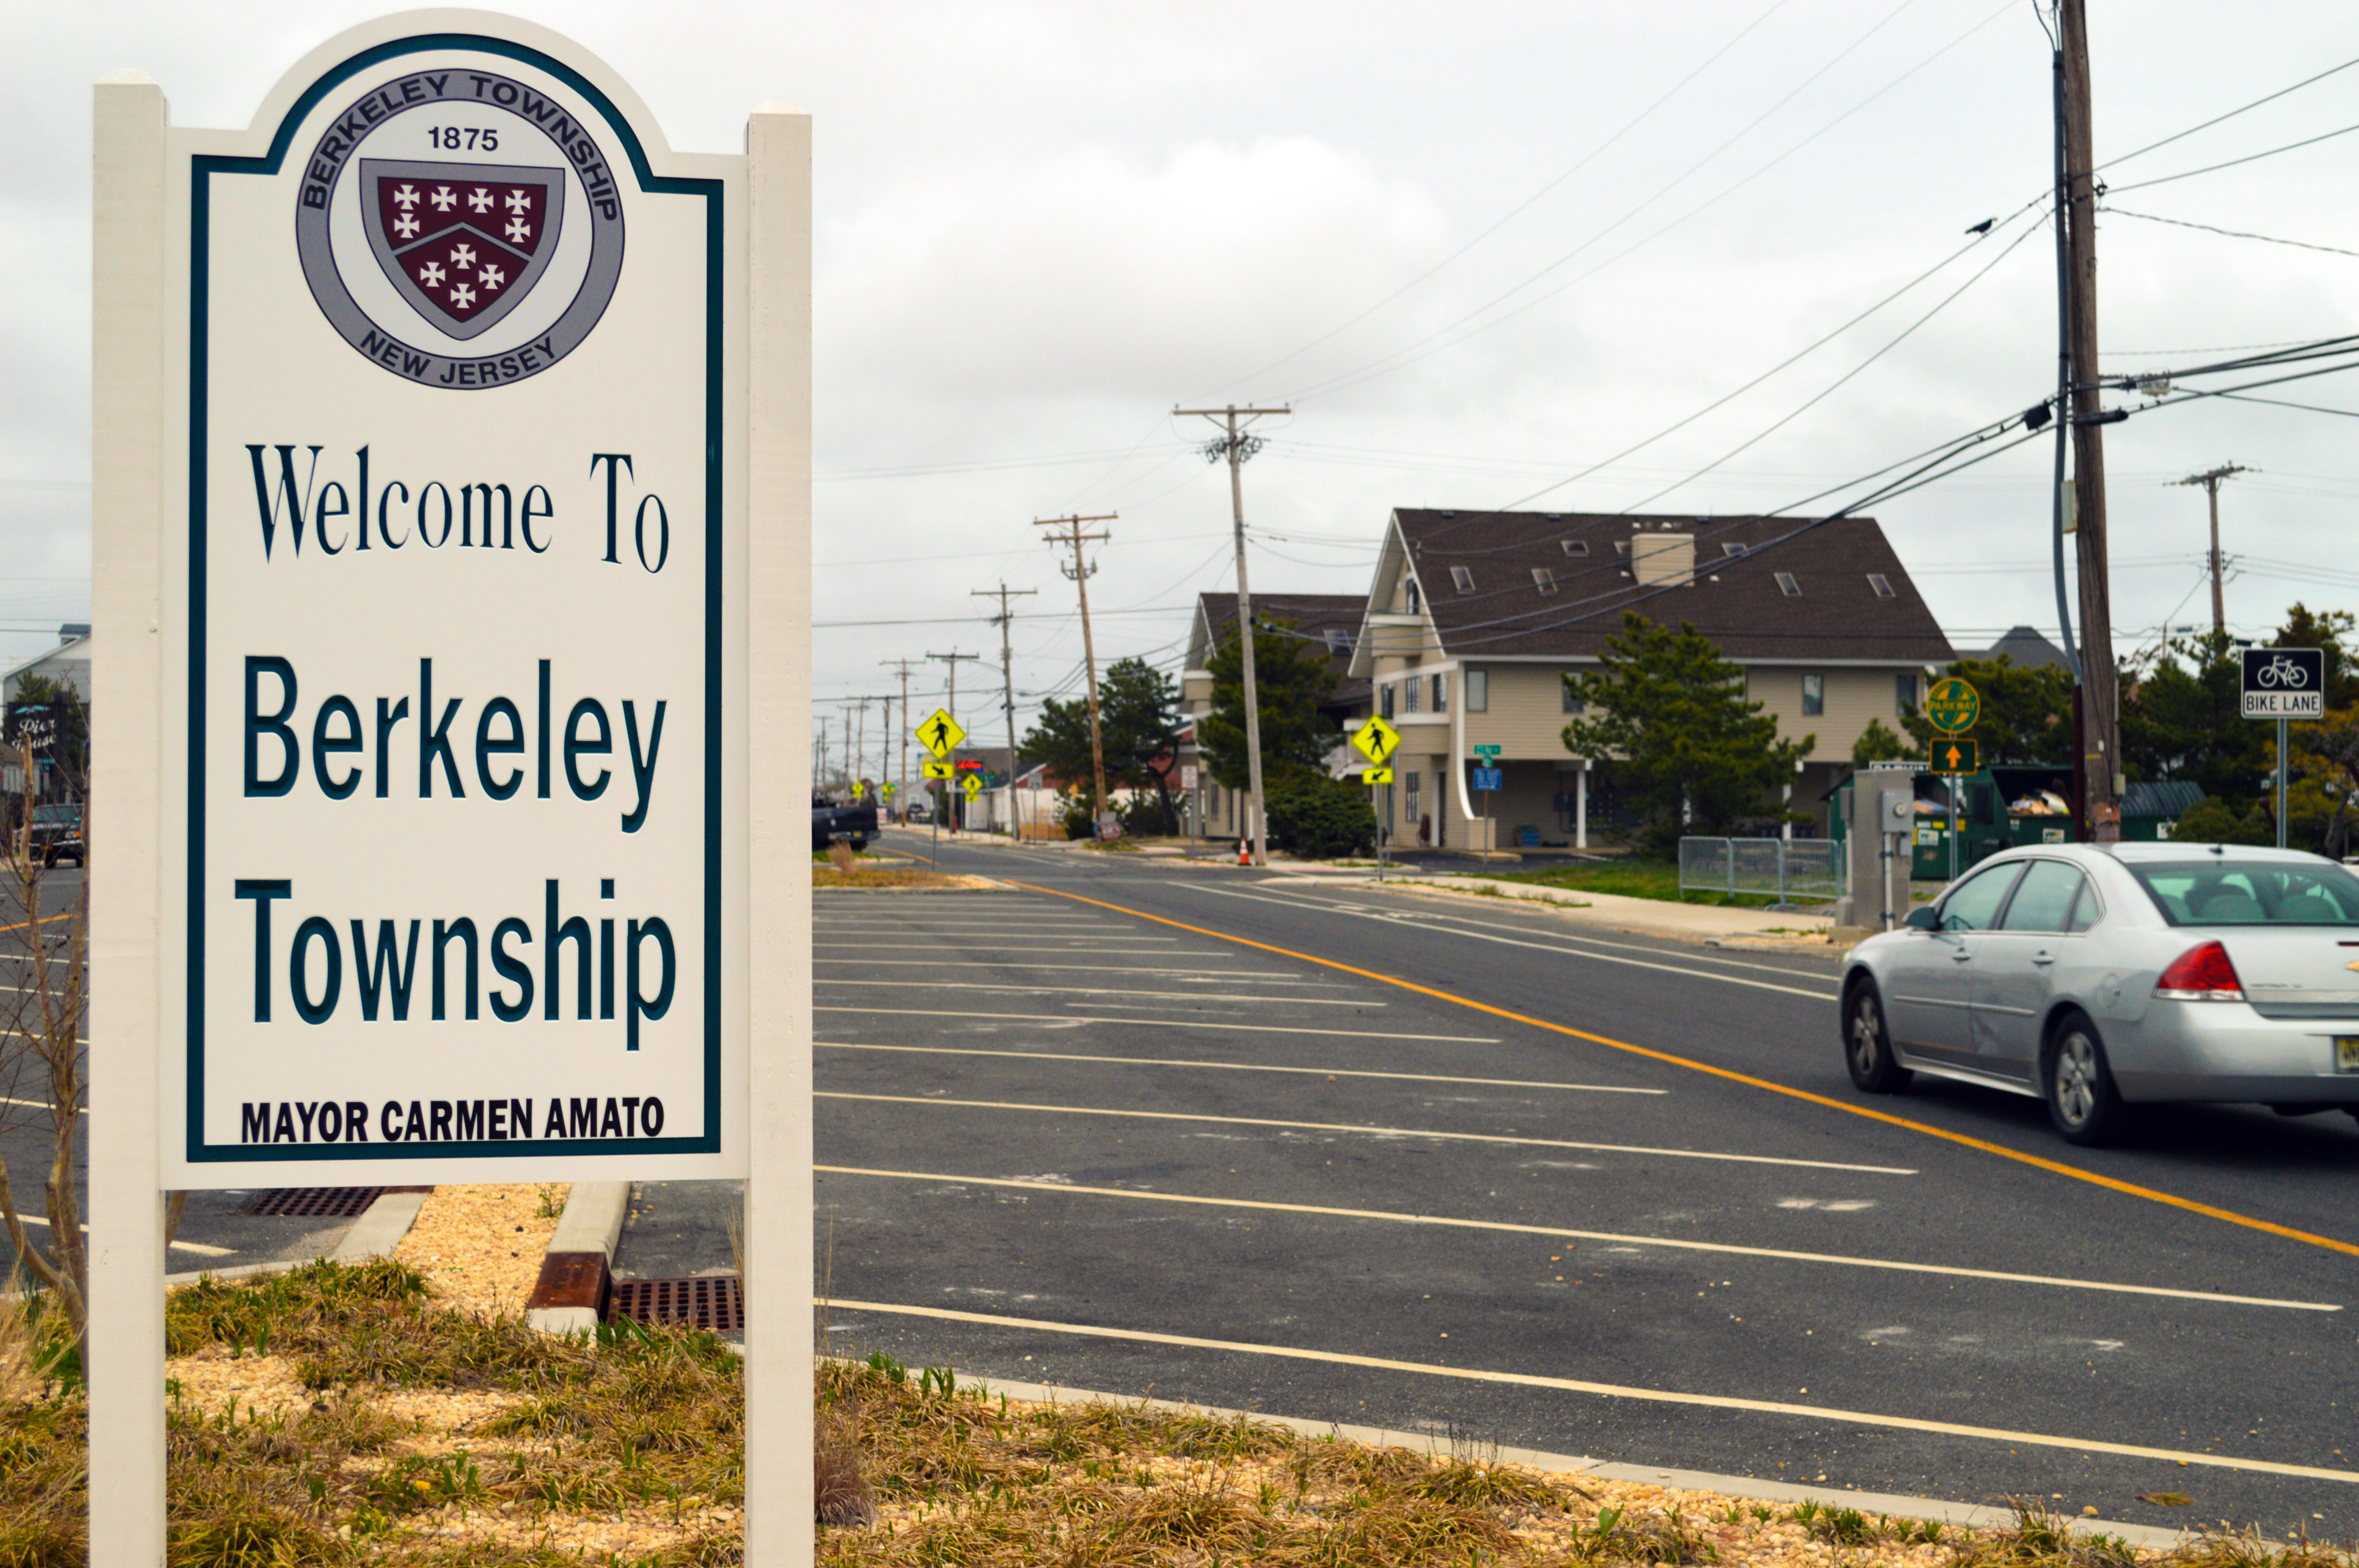 A 'Welcome to Berkeley Township' sign in South Seaside Park. (Photo: Daniel Nee)